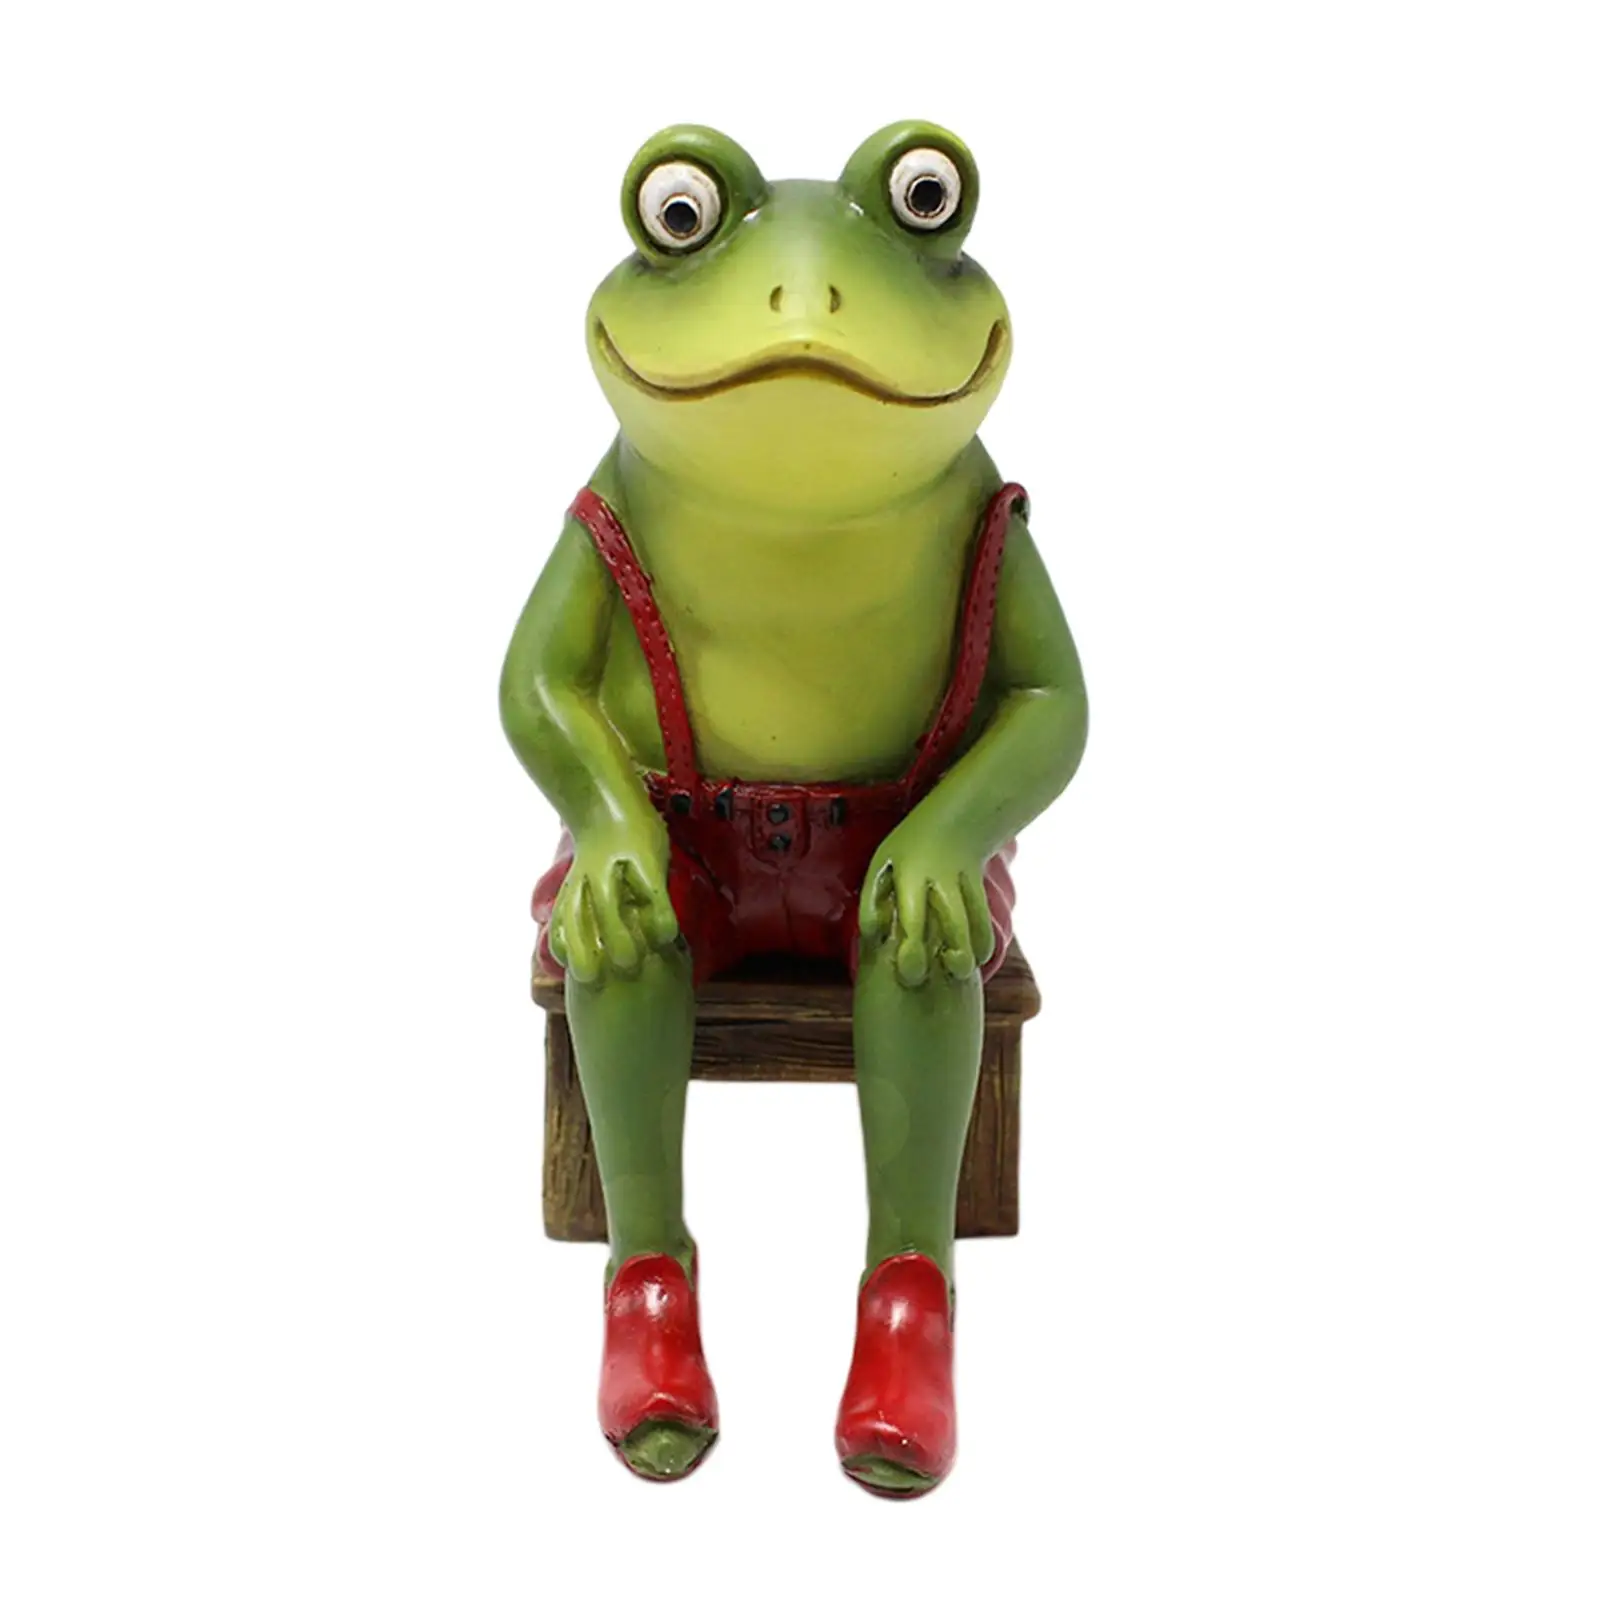 Creative Frog Figurine Collectible Statue,Resin Sculpture Craft Model,Garden Office Home Dining Room Decor